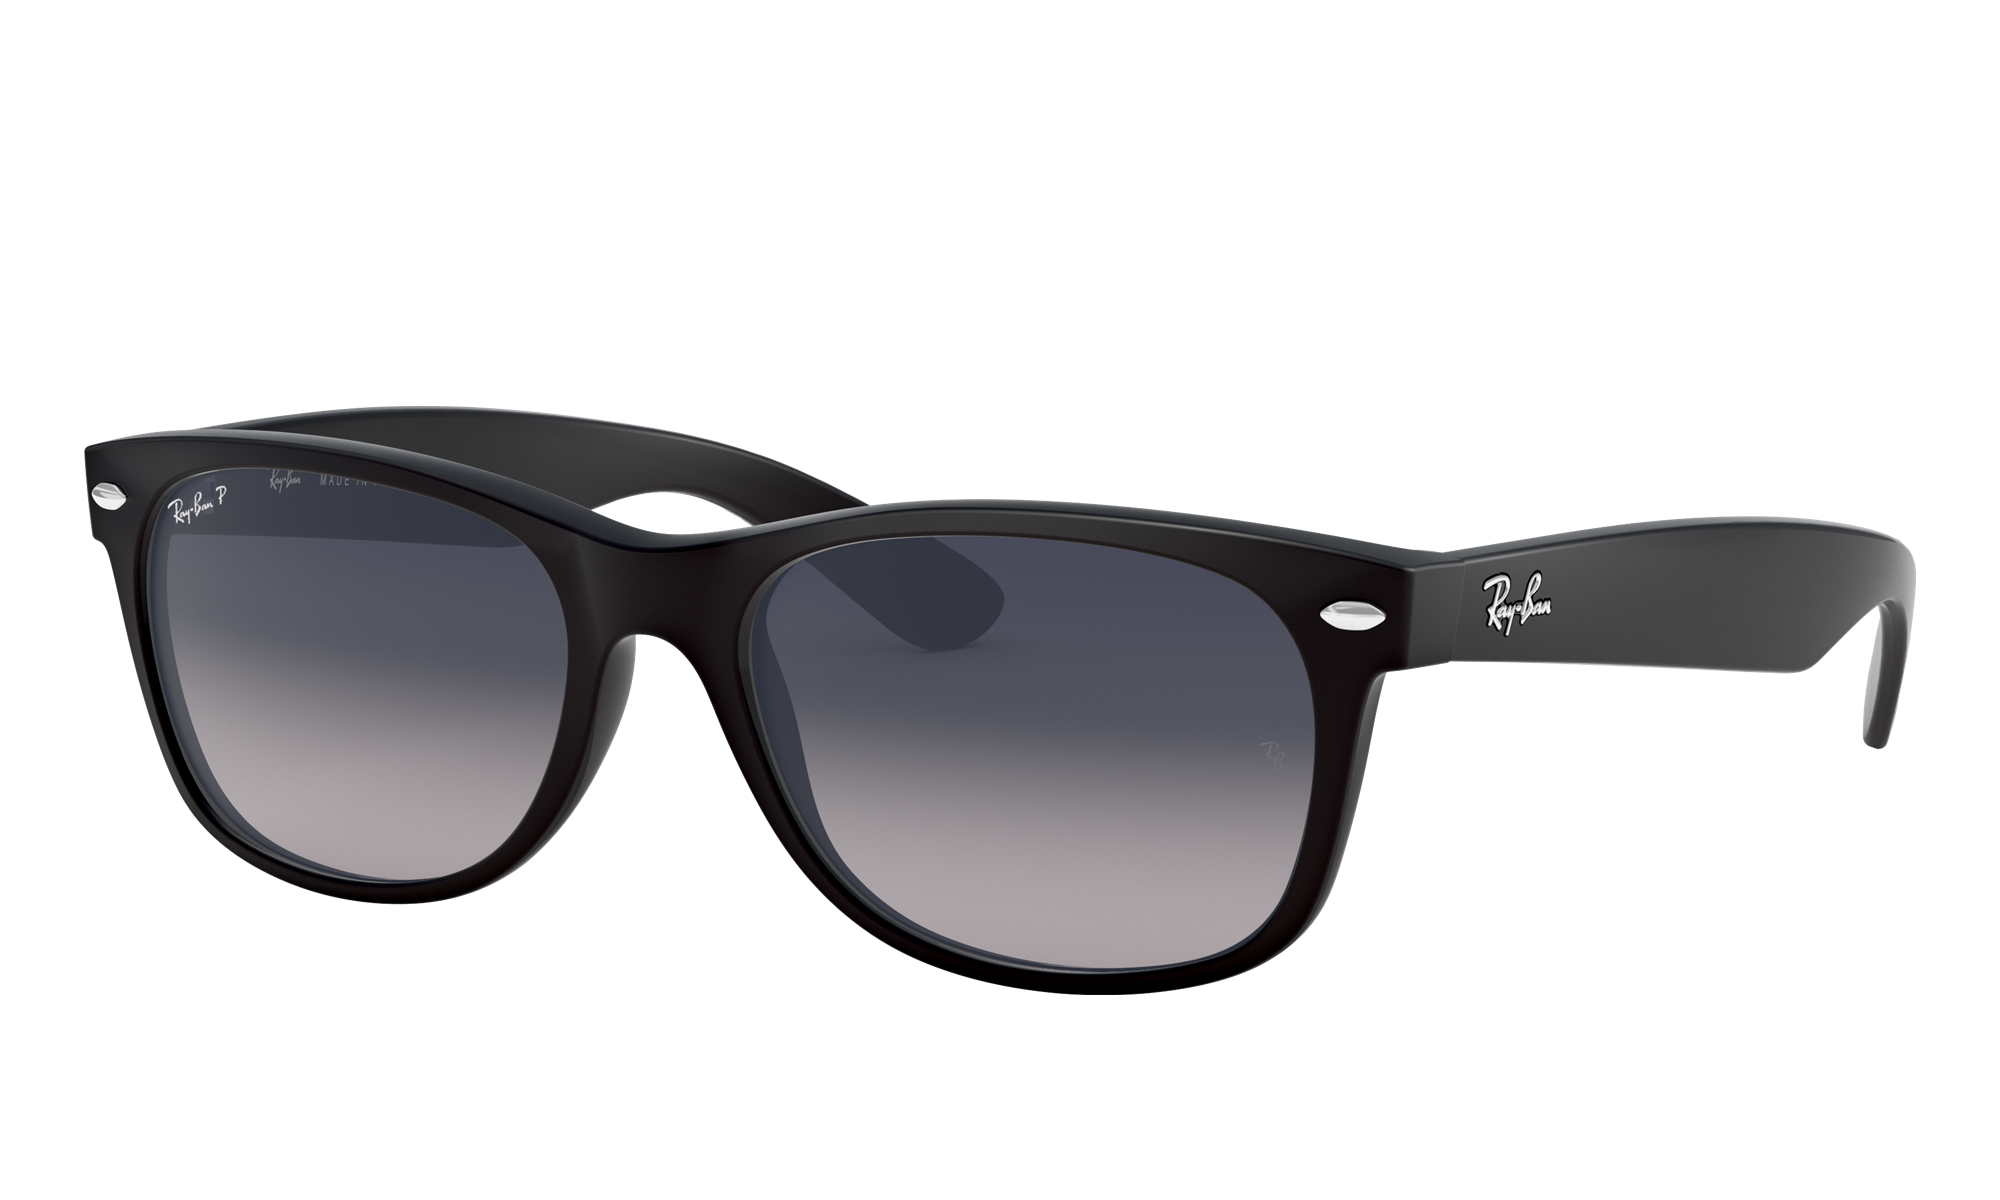 Ray-Ban Unisex Rb2132 Black Size: Small